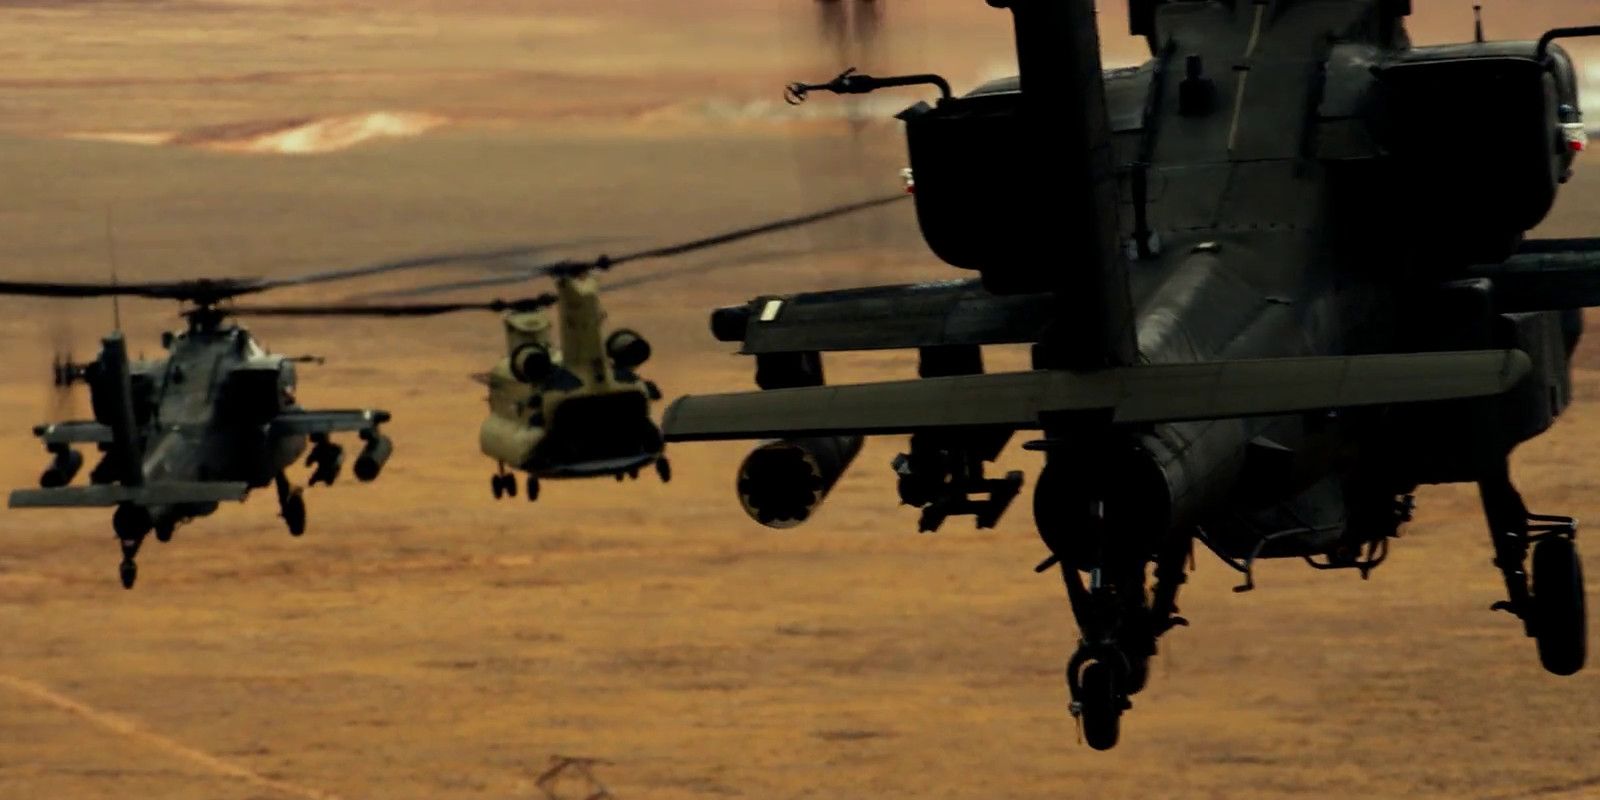 Apache helicopters swarming over desert-like land in Lone Survivor